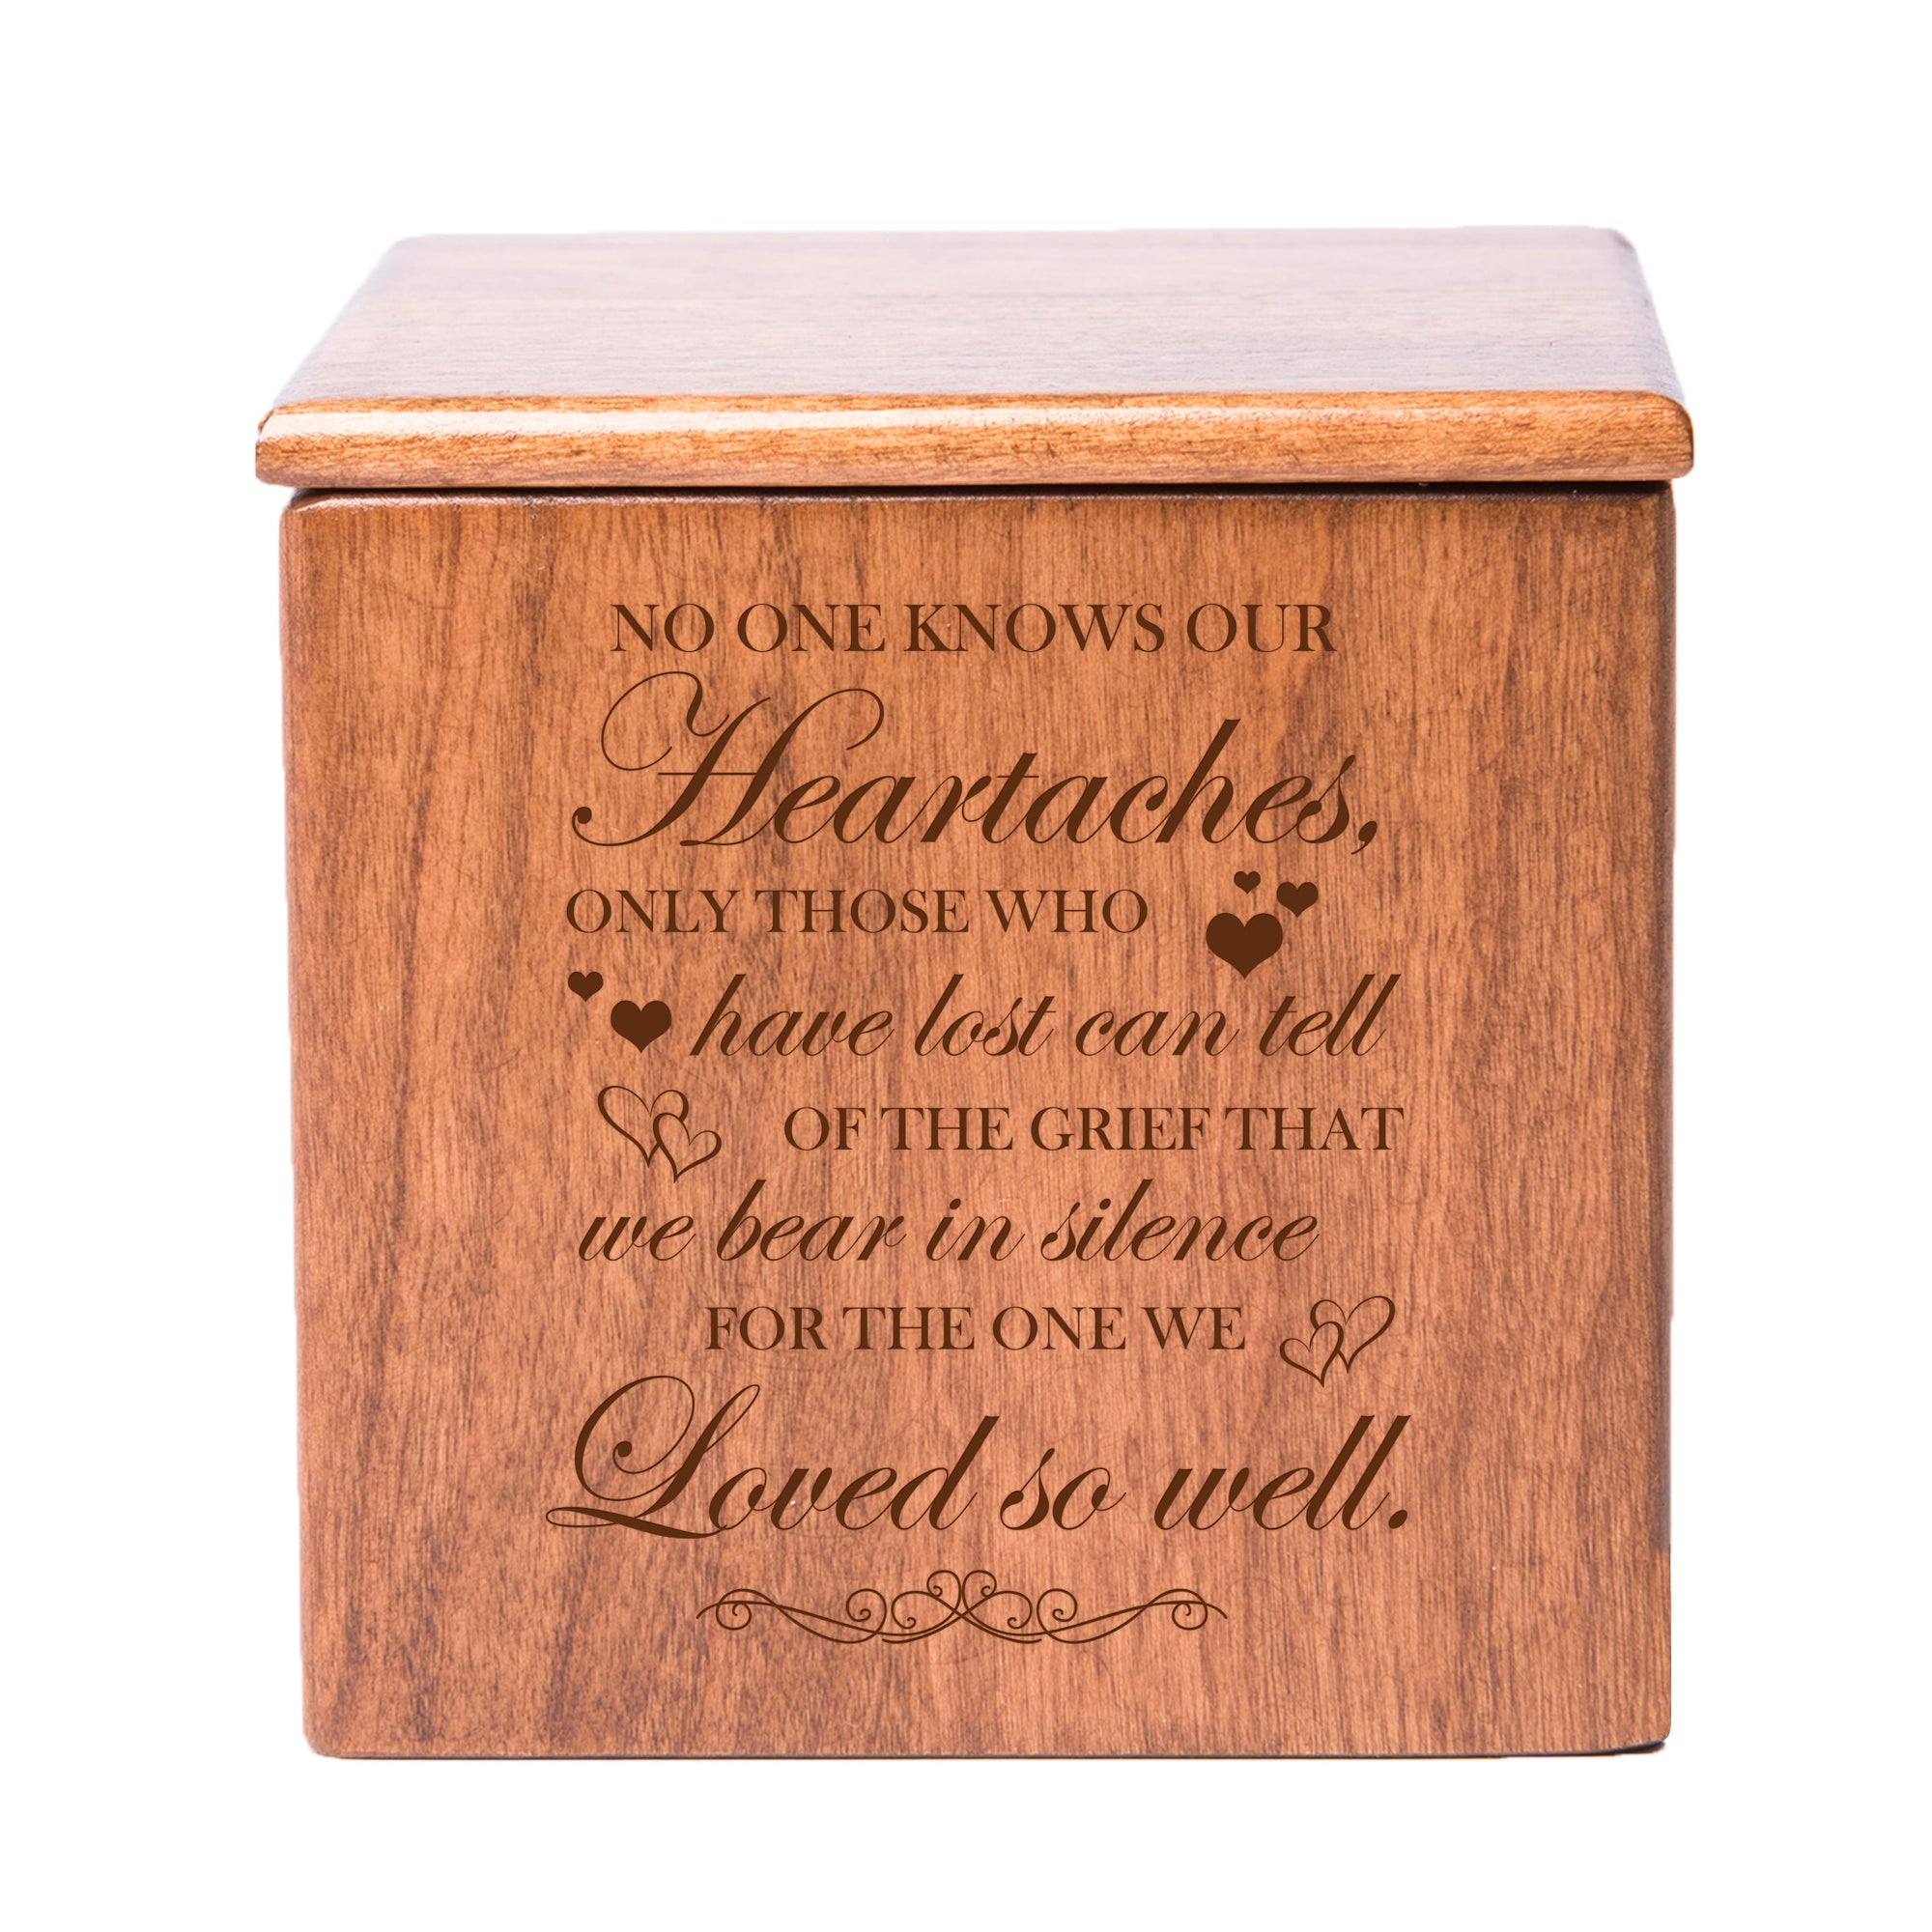 Pet Memorial Keepsake Cremation Urn Box for Dog or Cat - No One Knows Our Heartaches